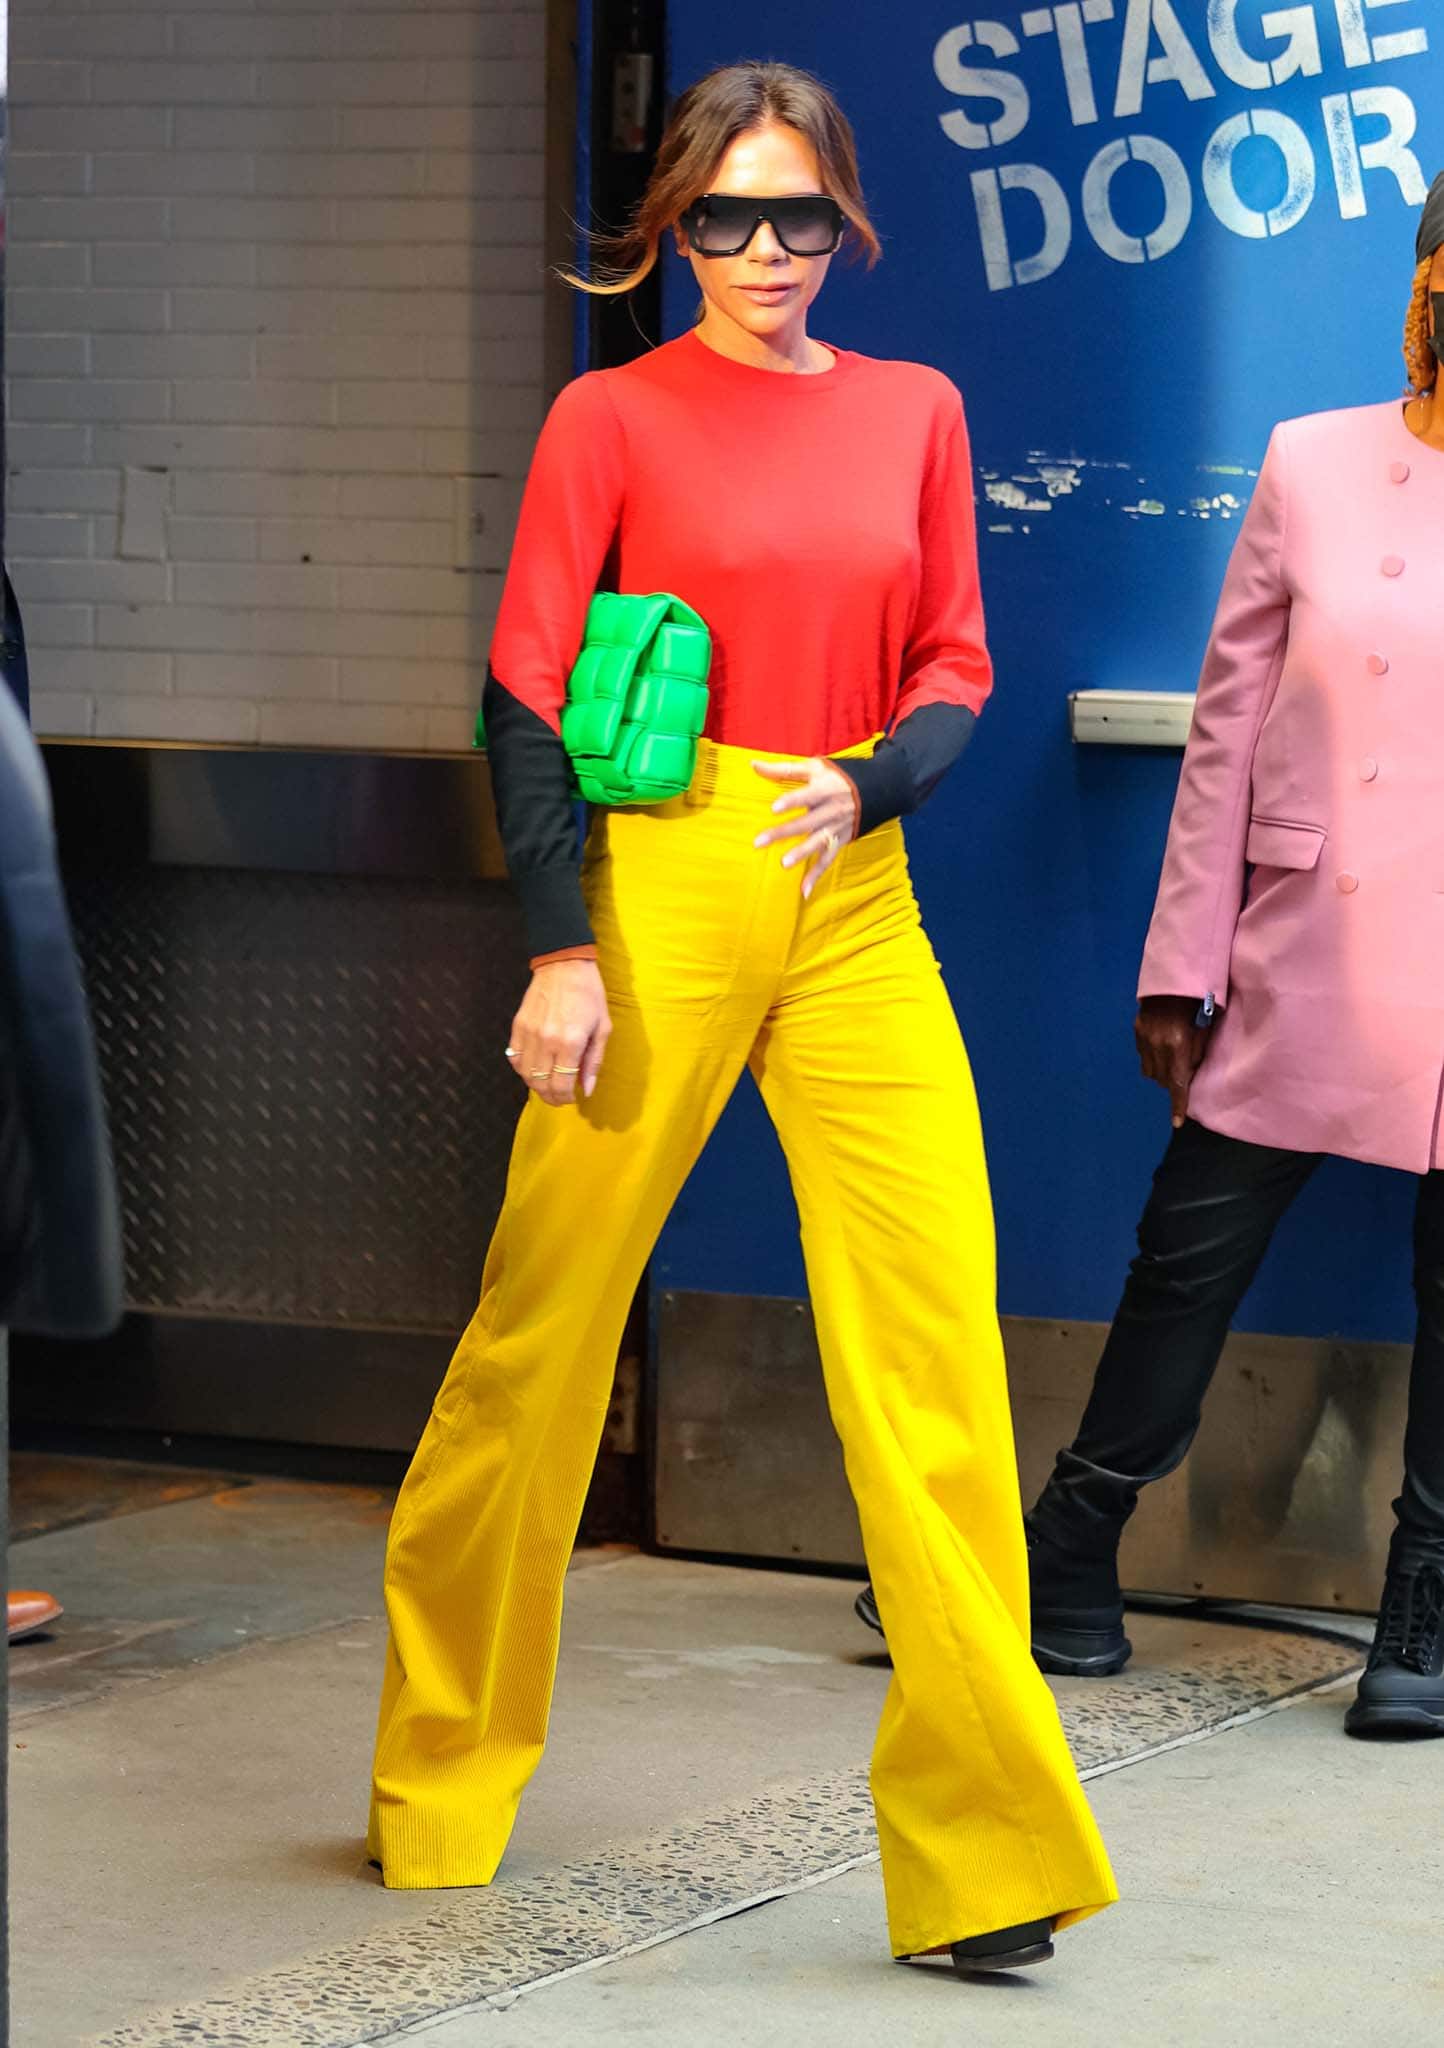 GMA viewers liken Victoria Beckham's outfit to Ronald McDonald and Winnie the Pooh